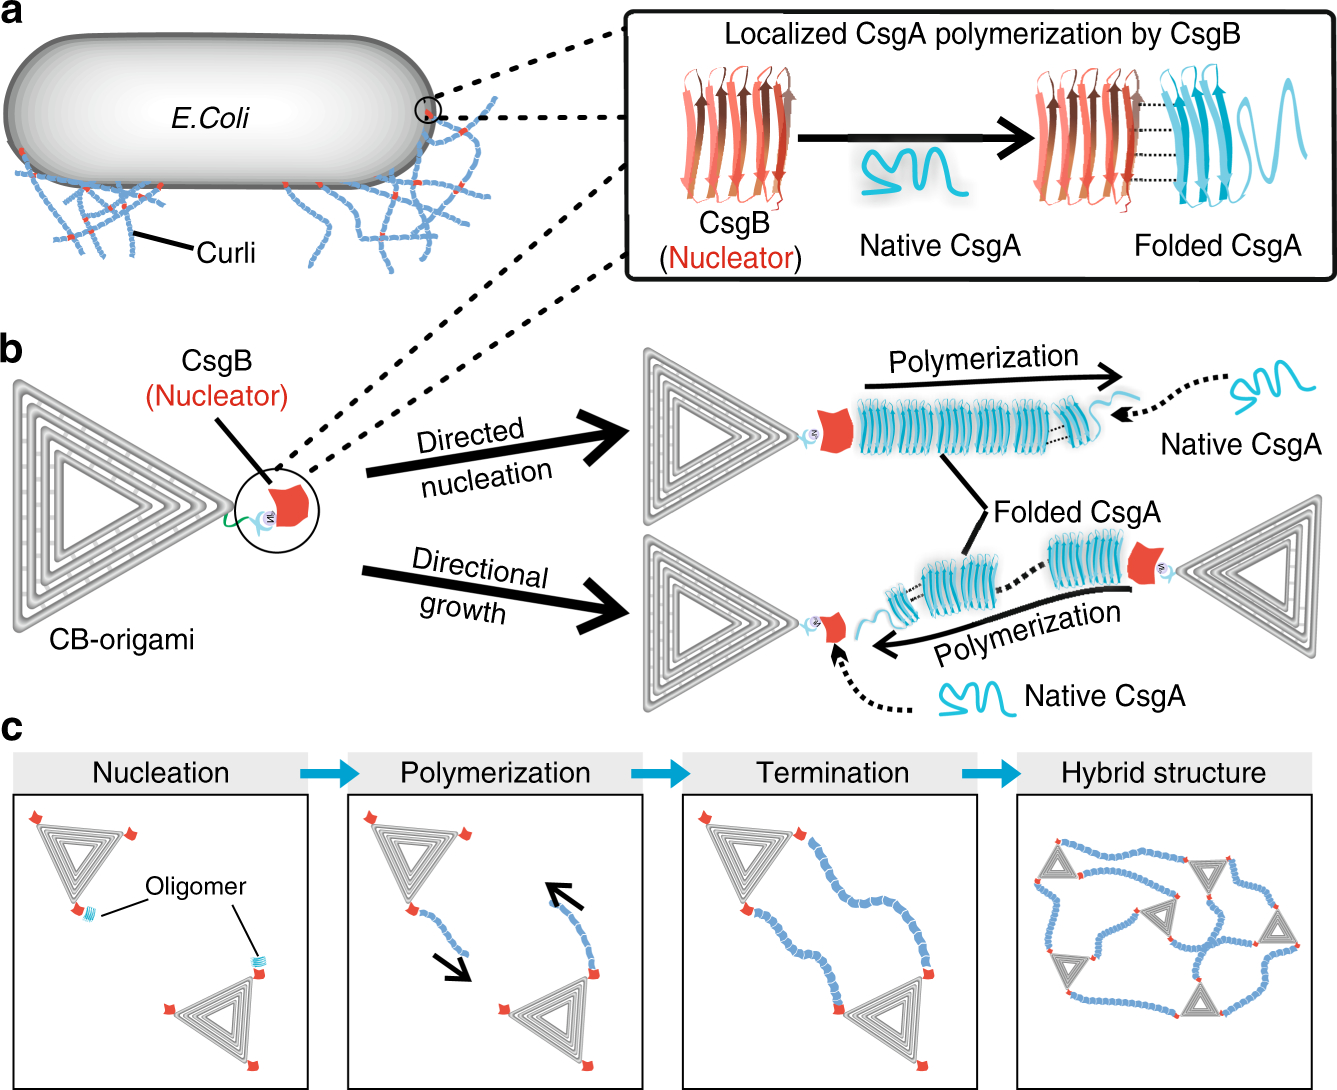 Origami B Cells Directing Curli Polymerization With Dna Origami Nucleators Nature